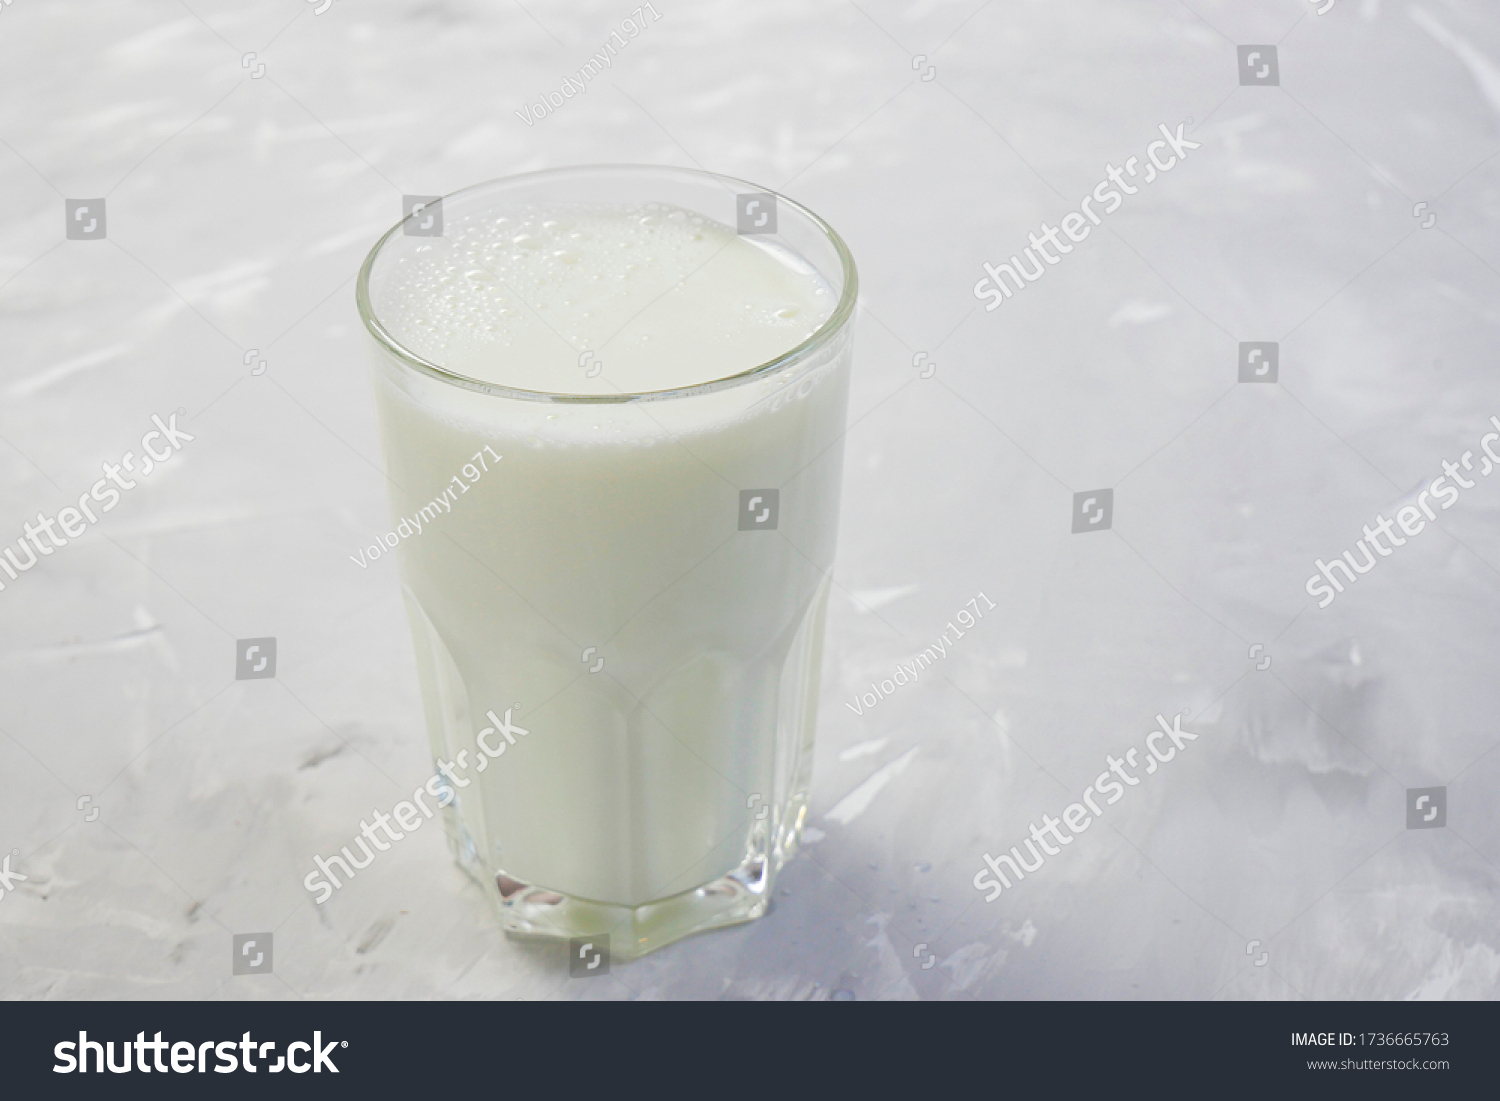 Tasty fresh milk on a white wooden background. a glass of milk. copy space #1736665763